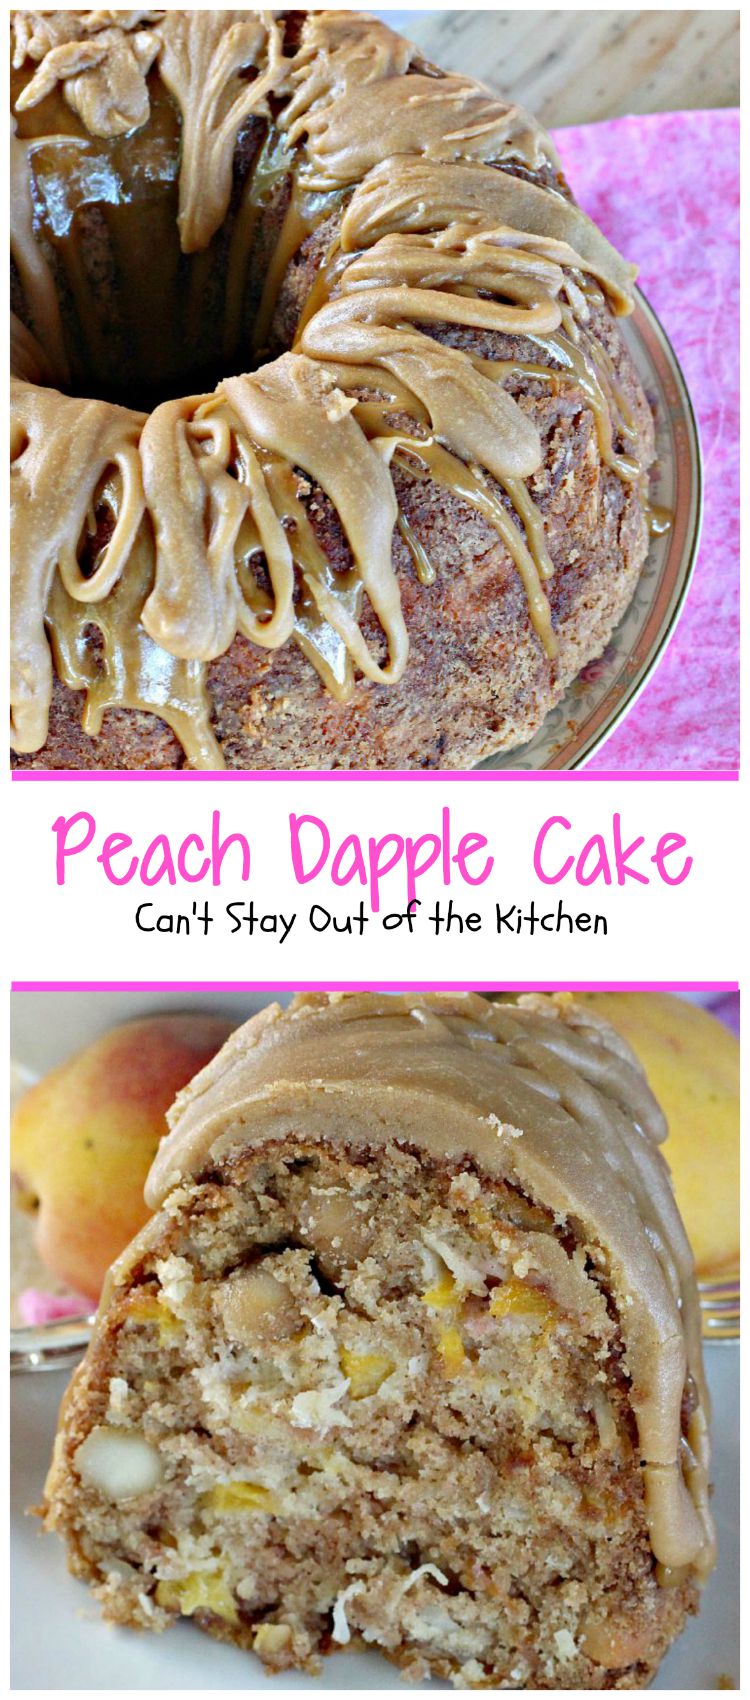 Peach Dapple Cake | Can't Stay Out of the Kitchen